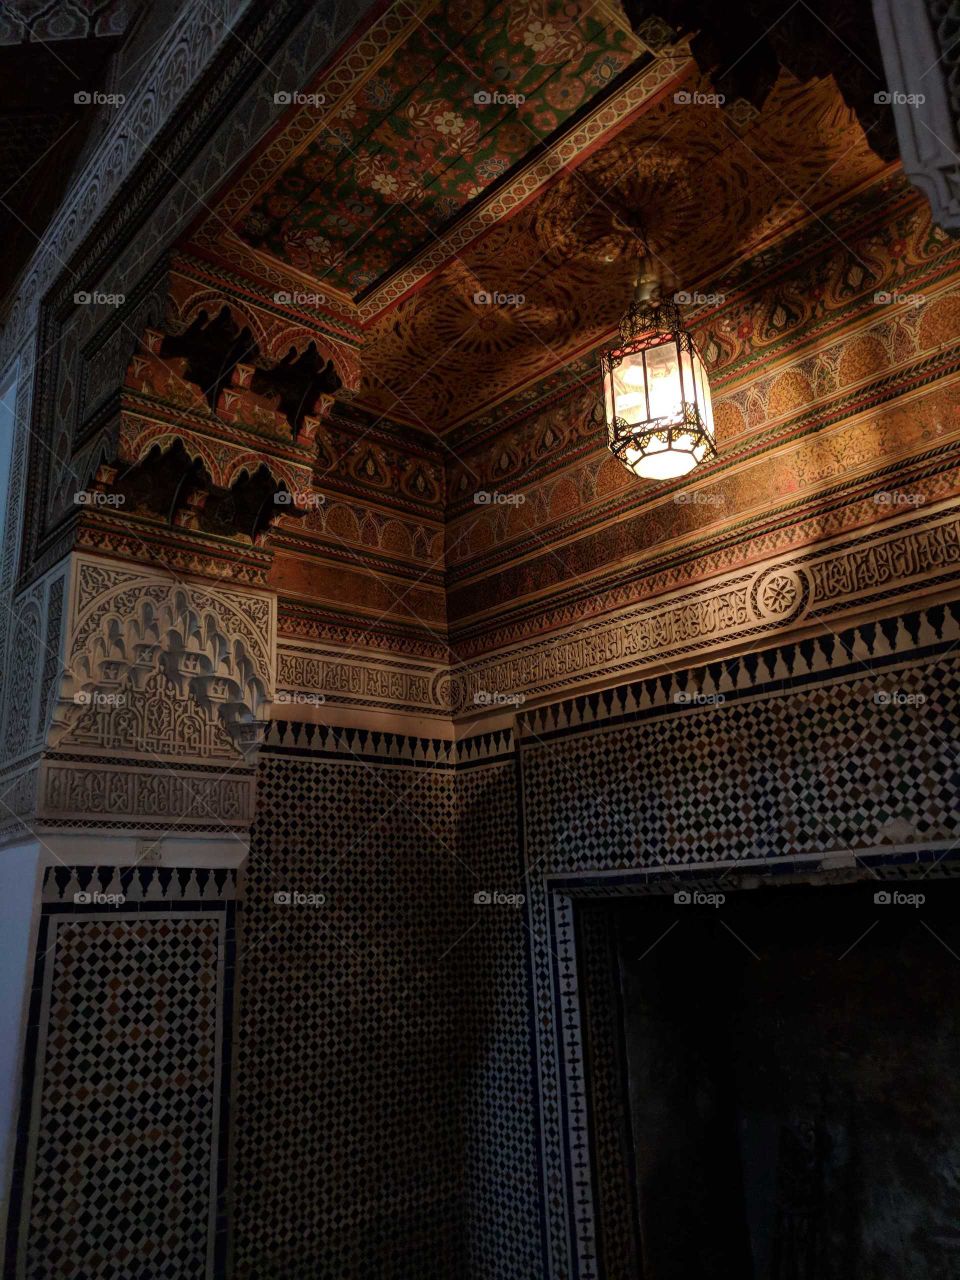 Hanging Lantern Illuminating a Colorful Ceramic Tile Mosaic Cut-Out Wall (Fireplace) in the Bahia Palace in Marrakech in Morocco